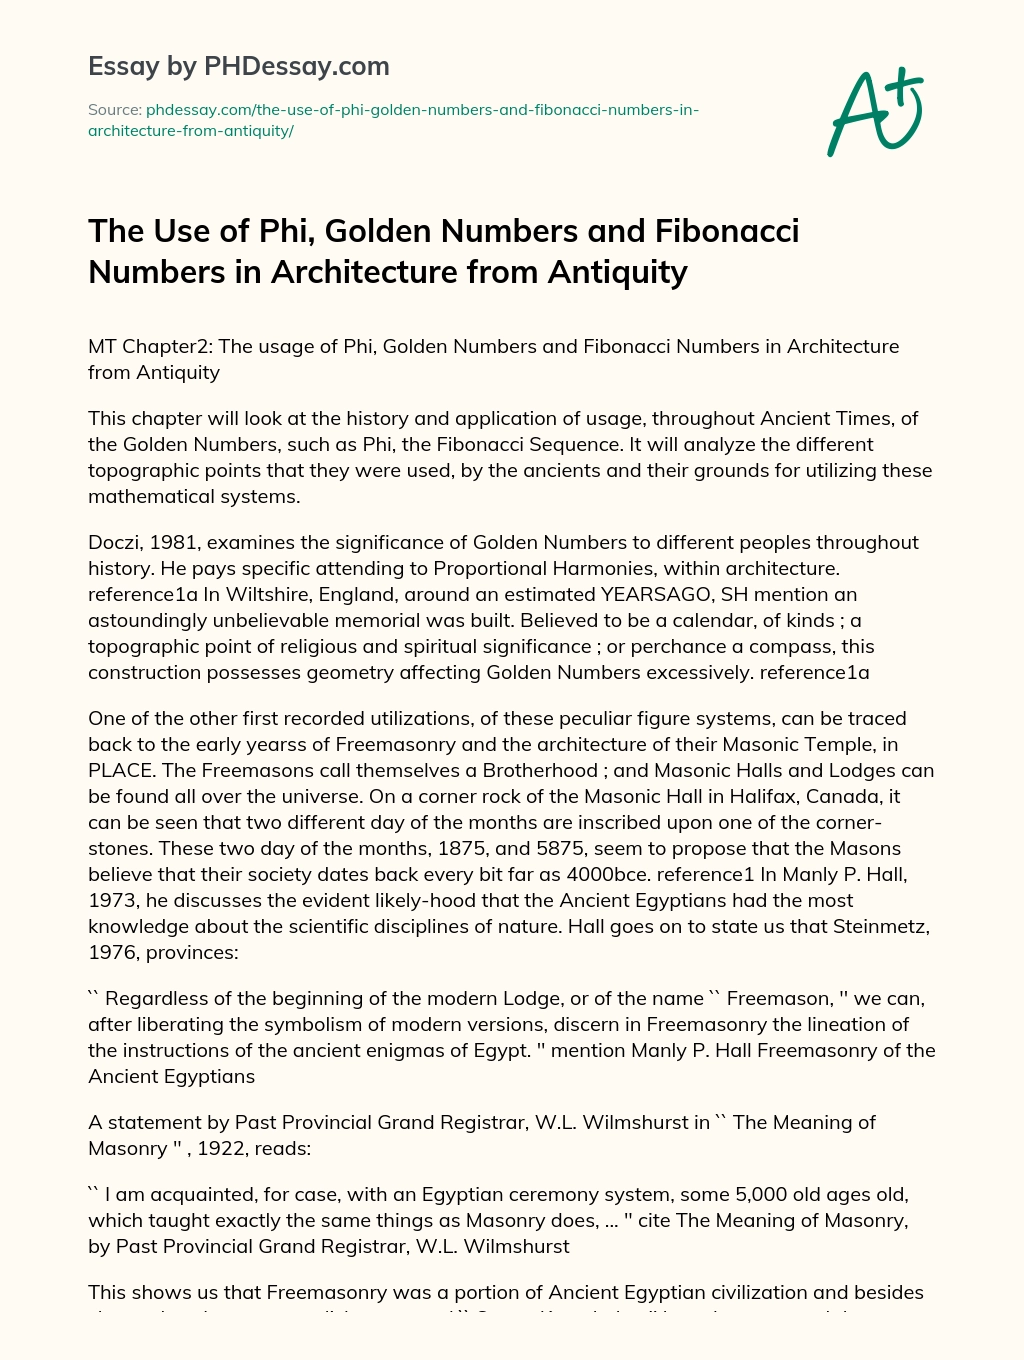 The Use of Phi, Golden Numbers and Fibonacci Numbers in Architecture from Antiquity essay